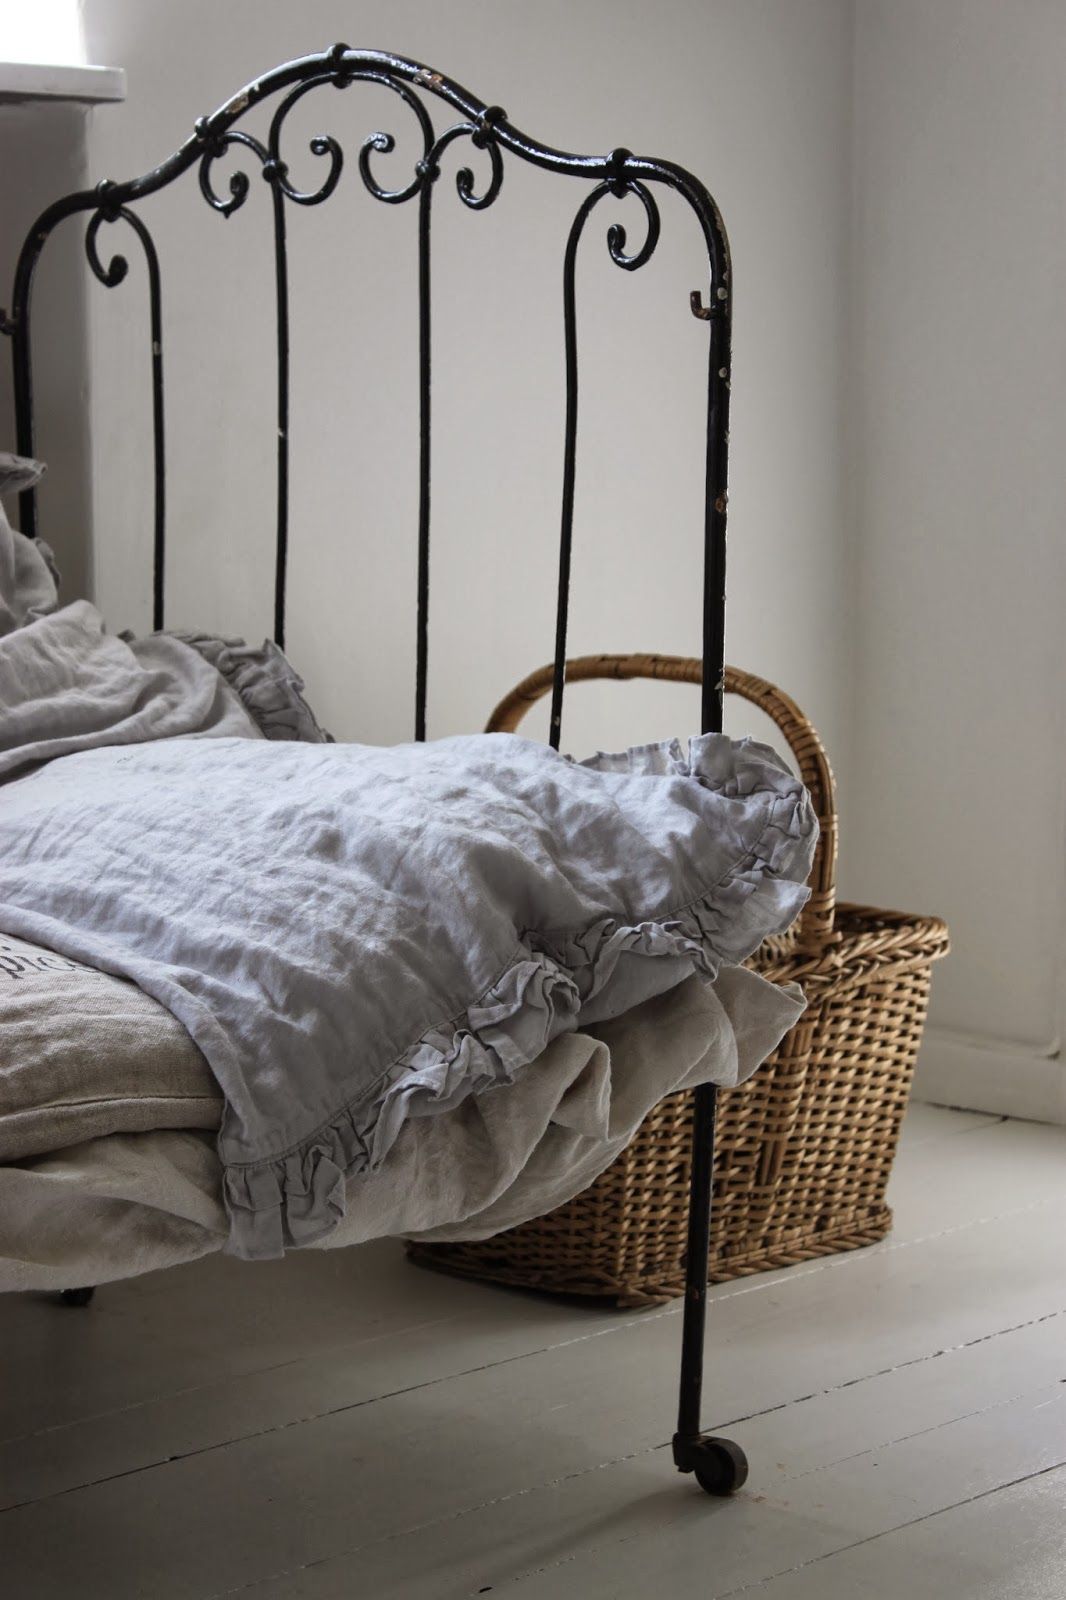 Classic Comfort: Explore the Timeless Appeal of Iron Bed Designs